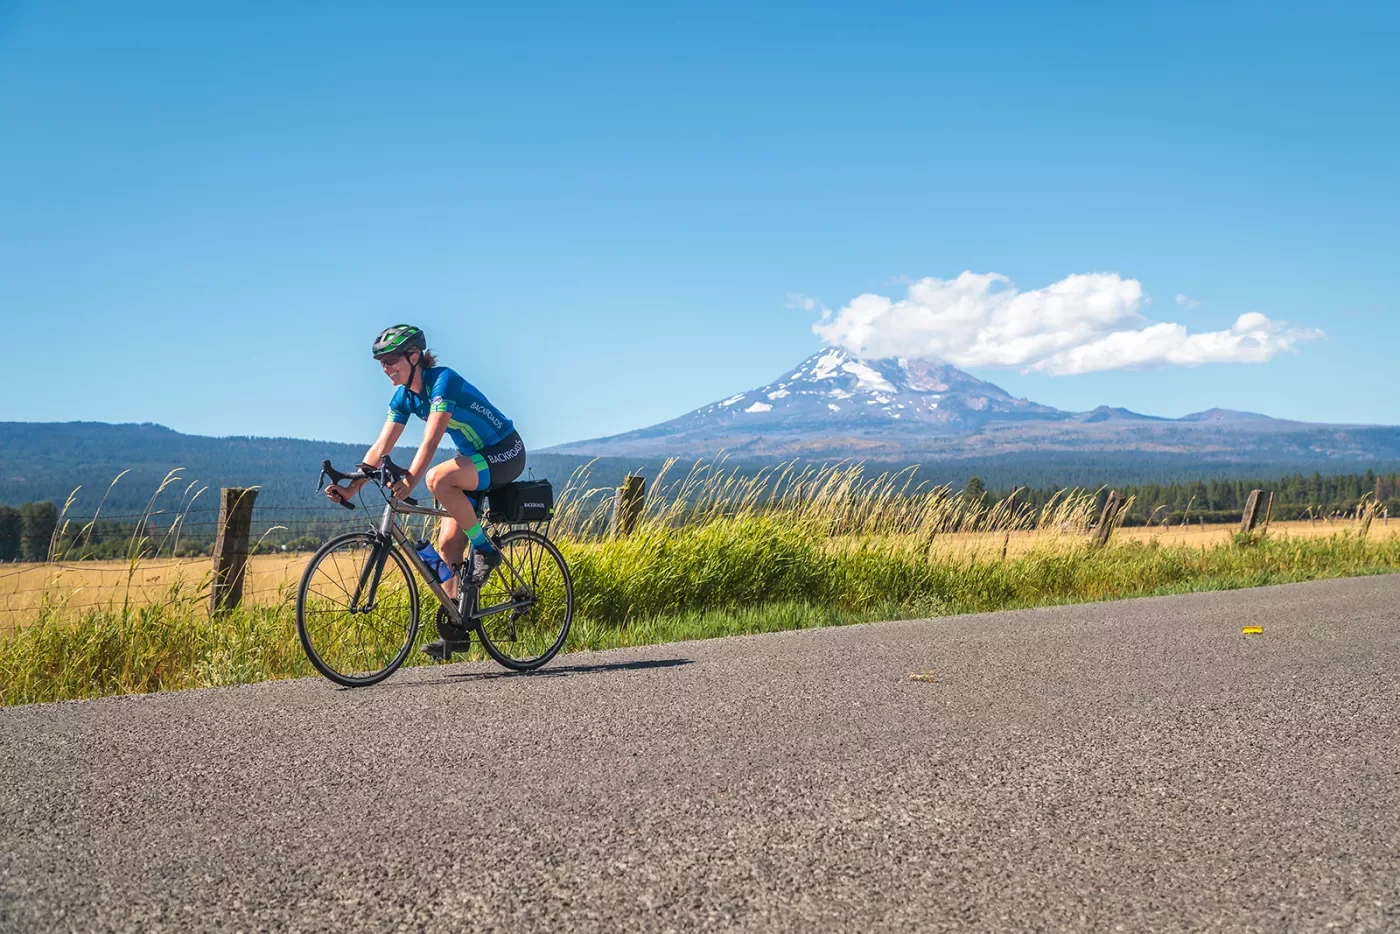 Guest riding down grassy road, Mount Hood in background.